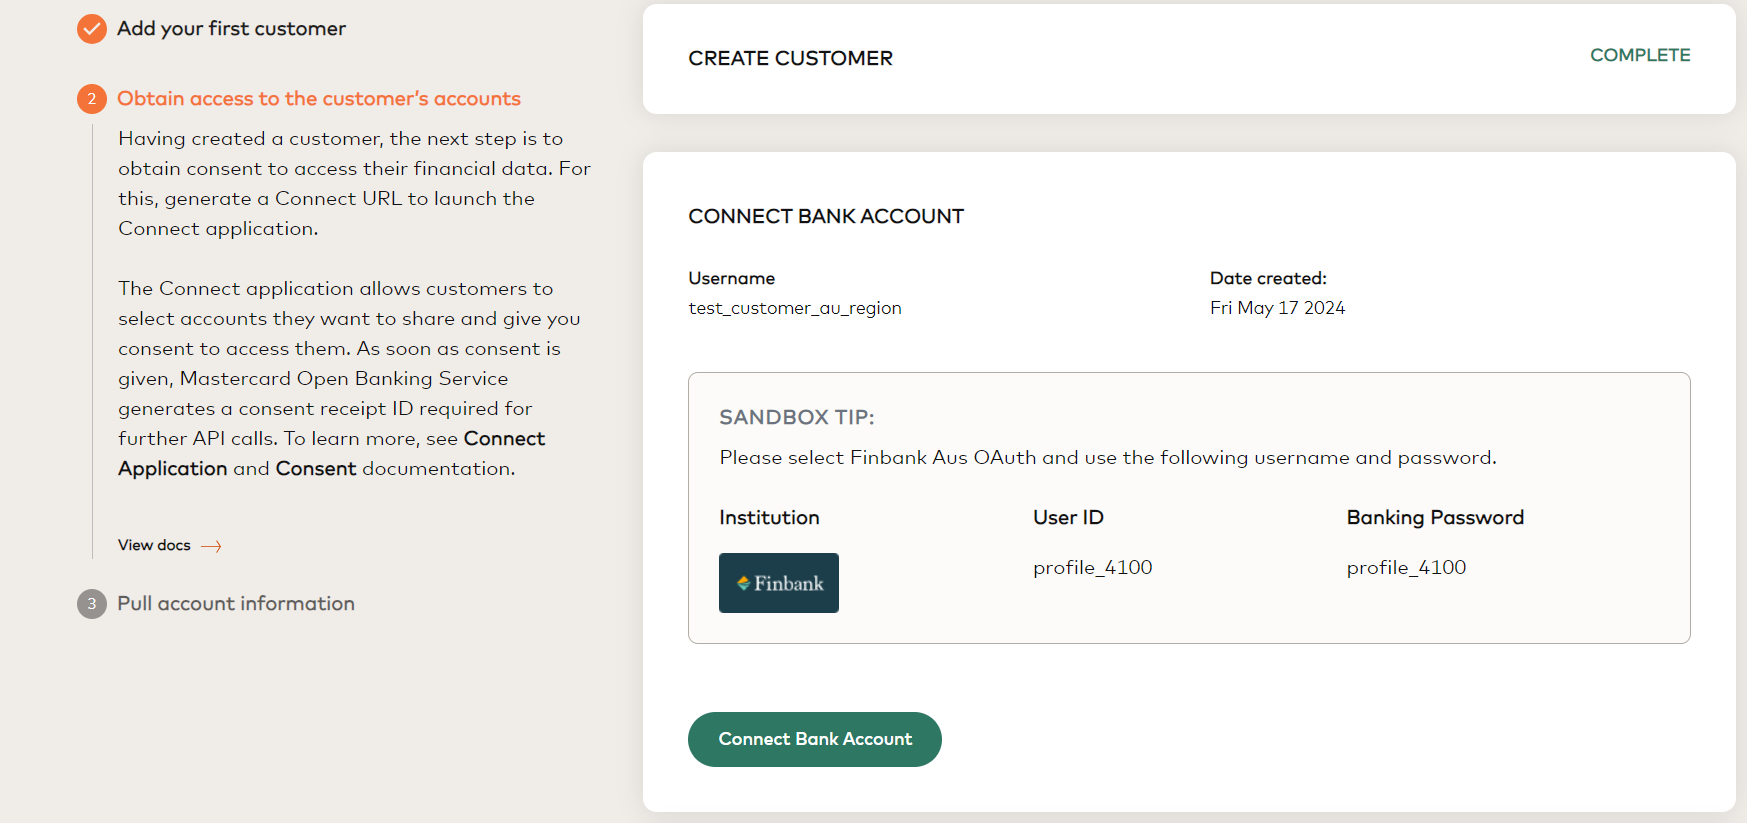 add bank account page